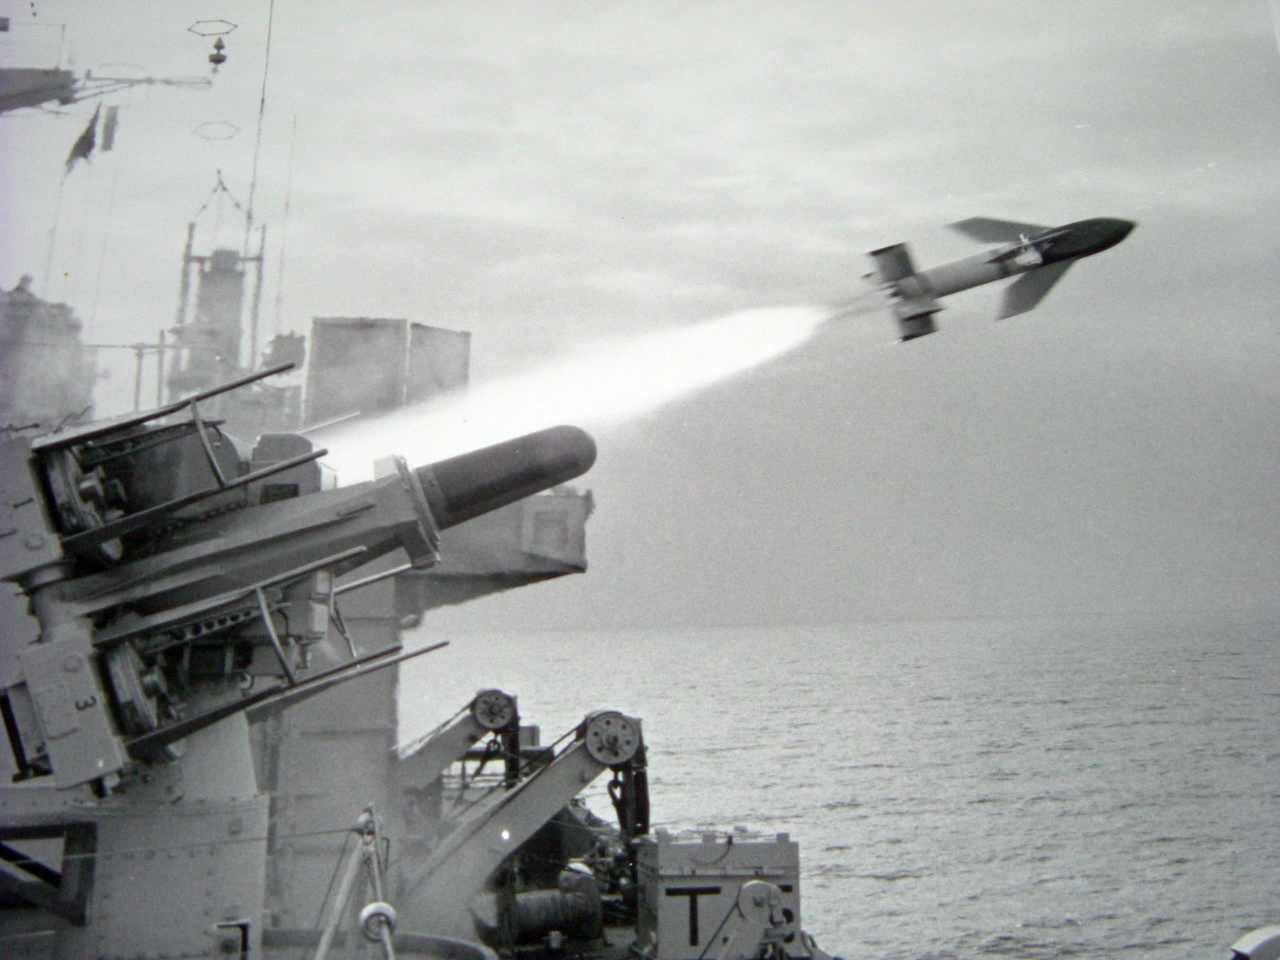 Seacat missile being fired from Intrepid